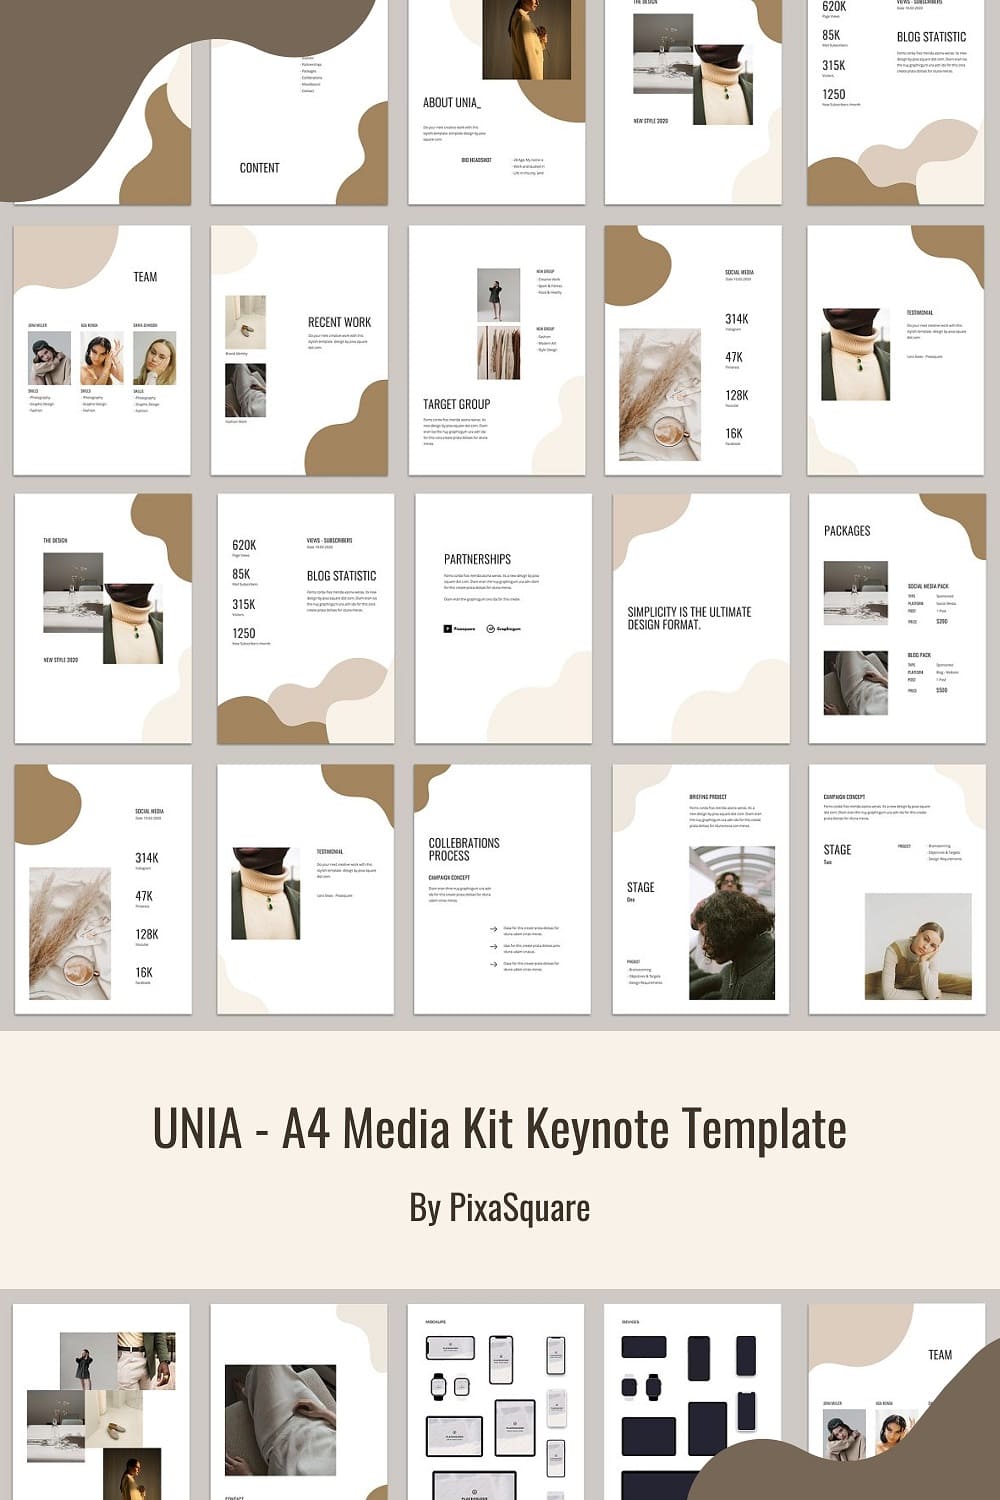 Unia template slides are decorated with milky and cinnamon spots.